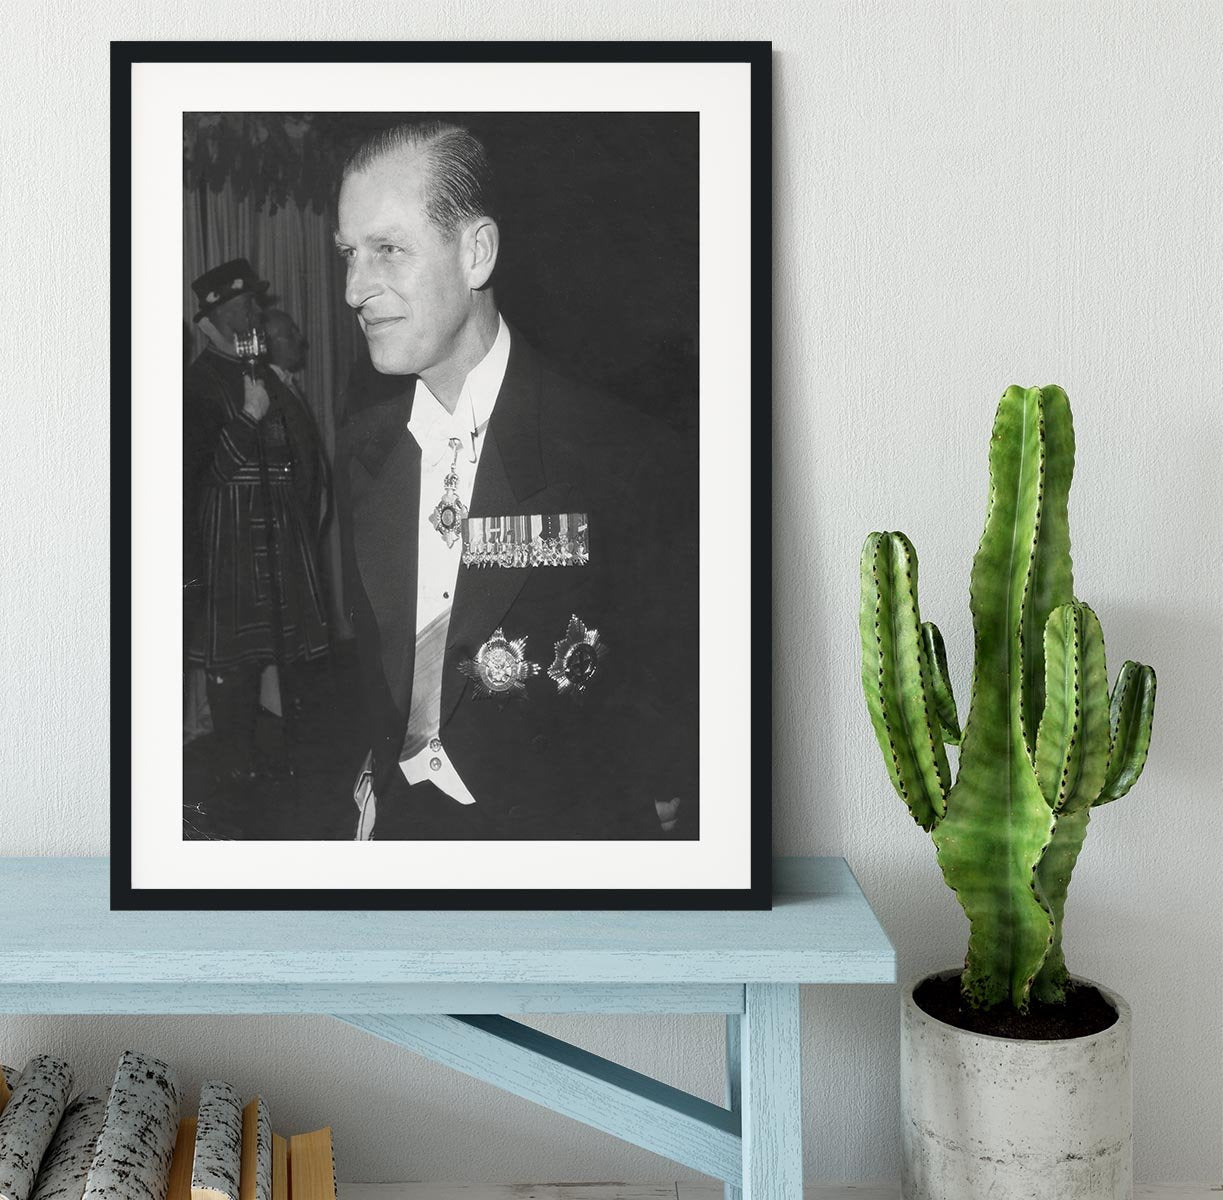 Prince Philip attending the opera at Covent Garden Framed Print - Canvas Art Rocks - 1